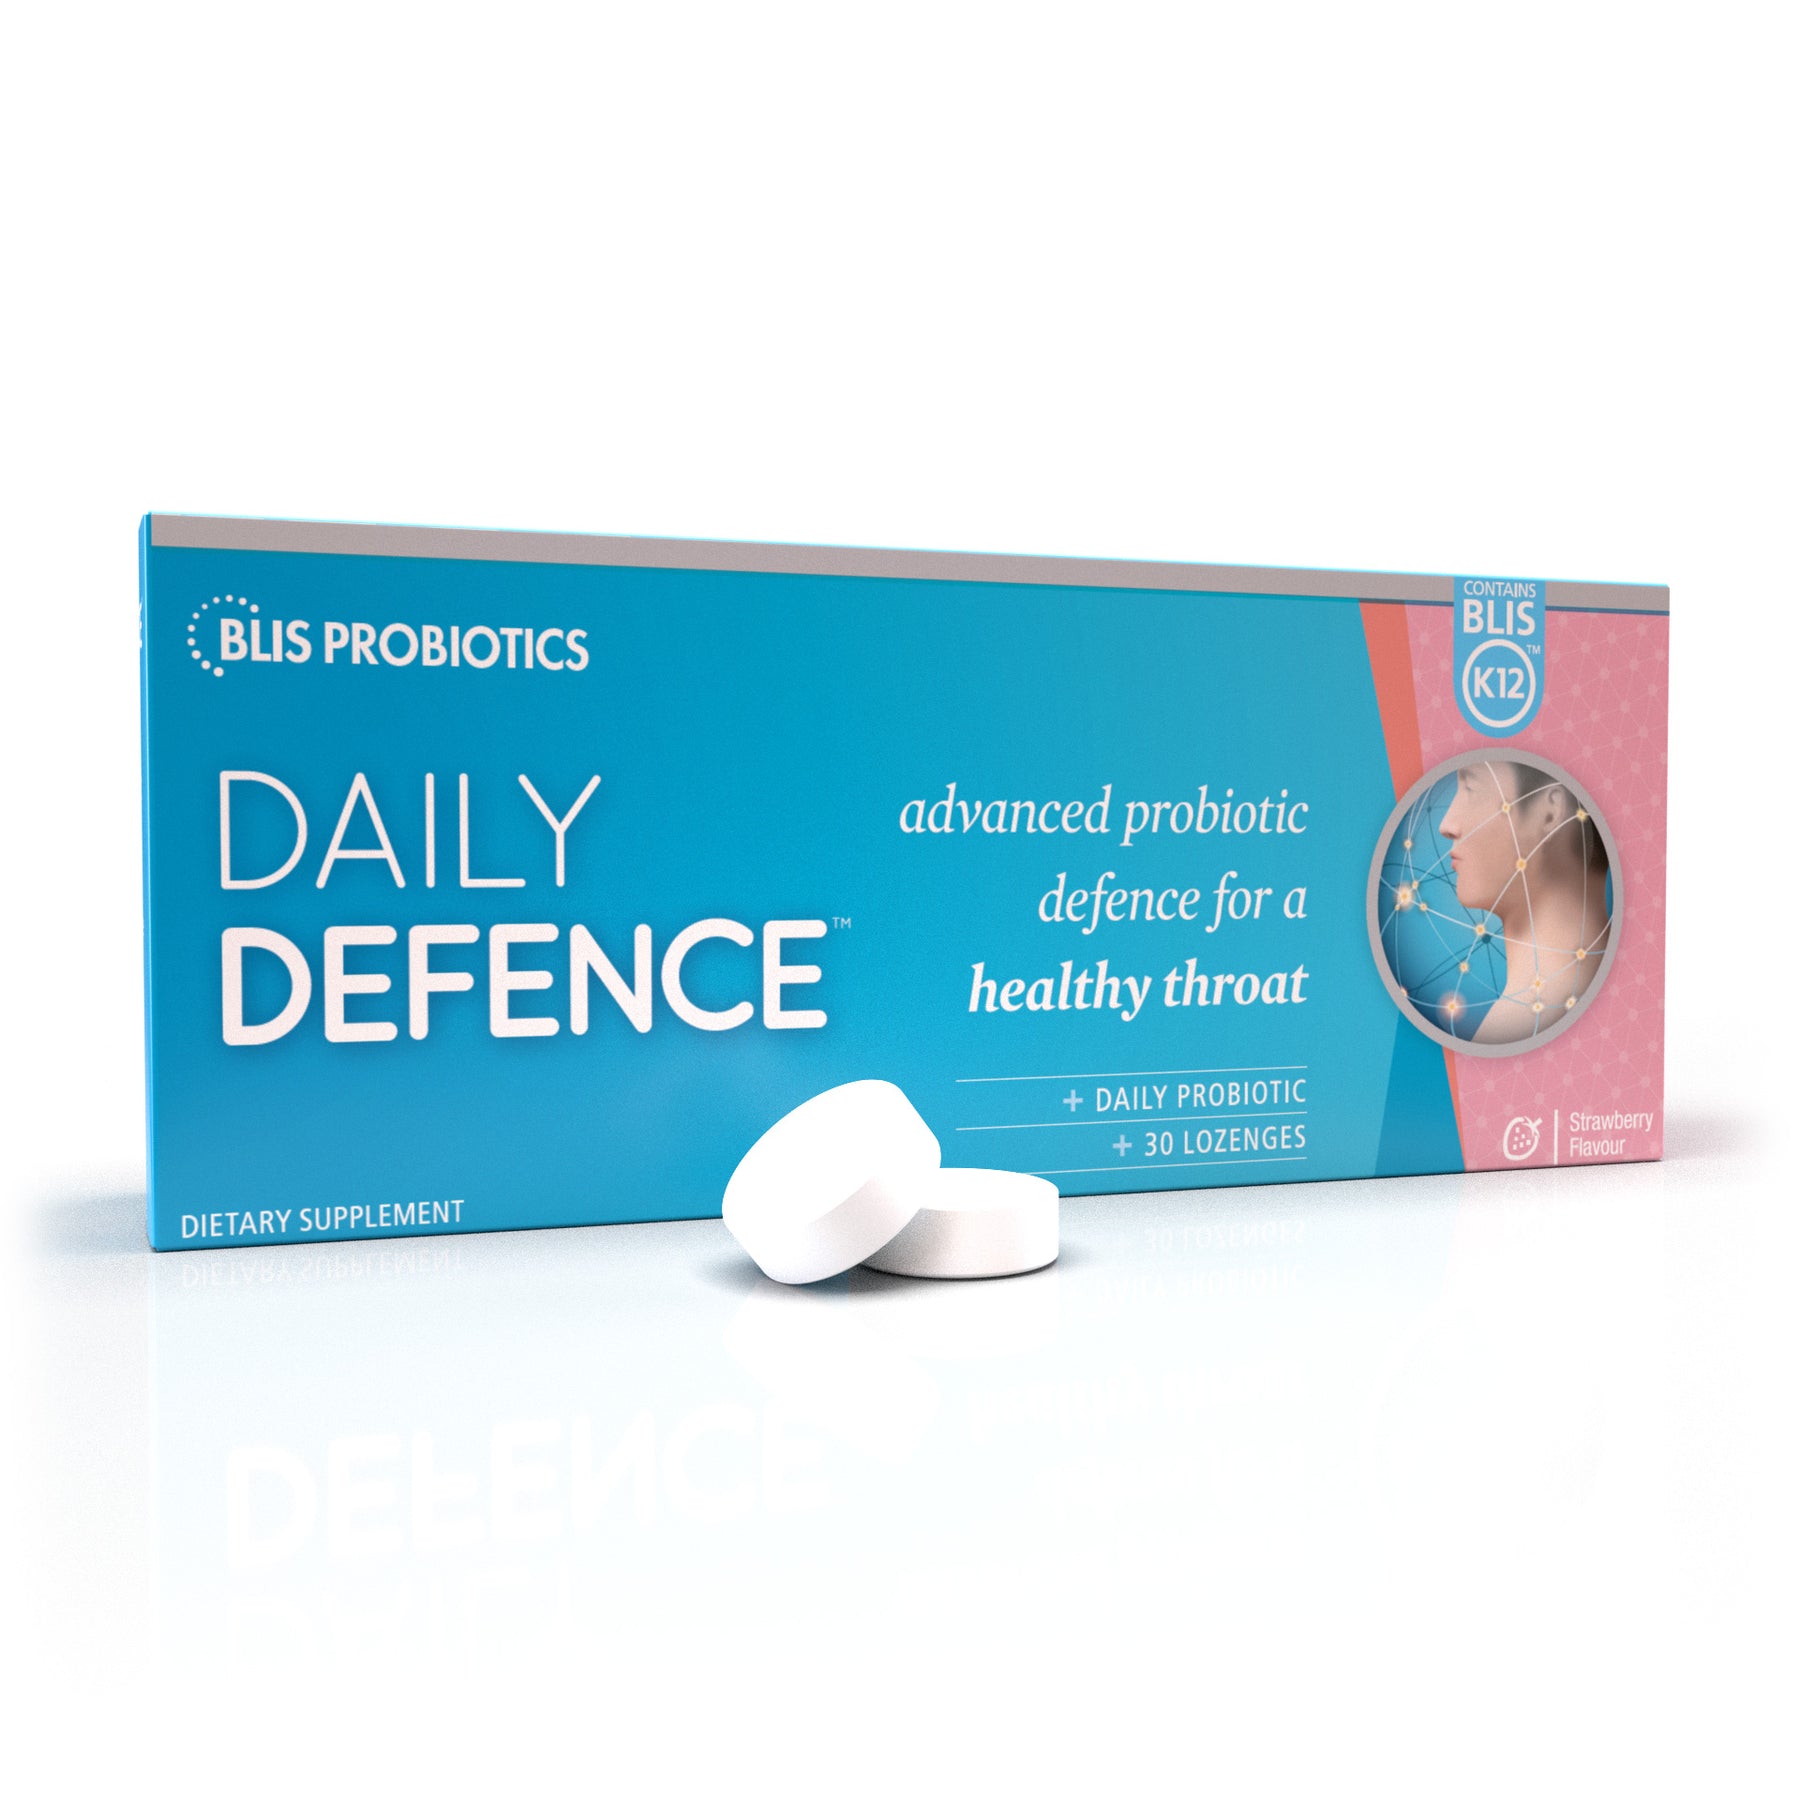 Daily Defence Strawberry Flavour - adanced probiotics for throat health and immunity support